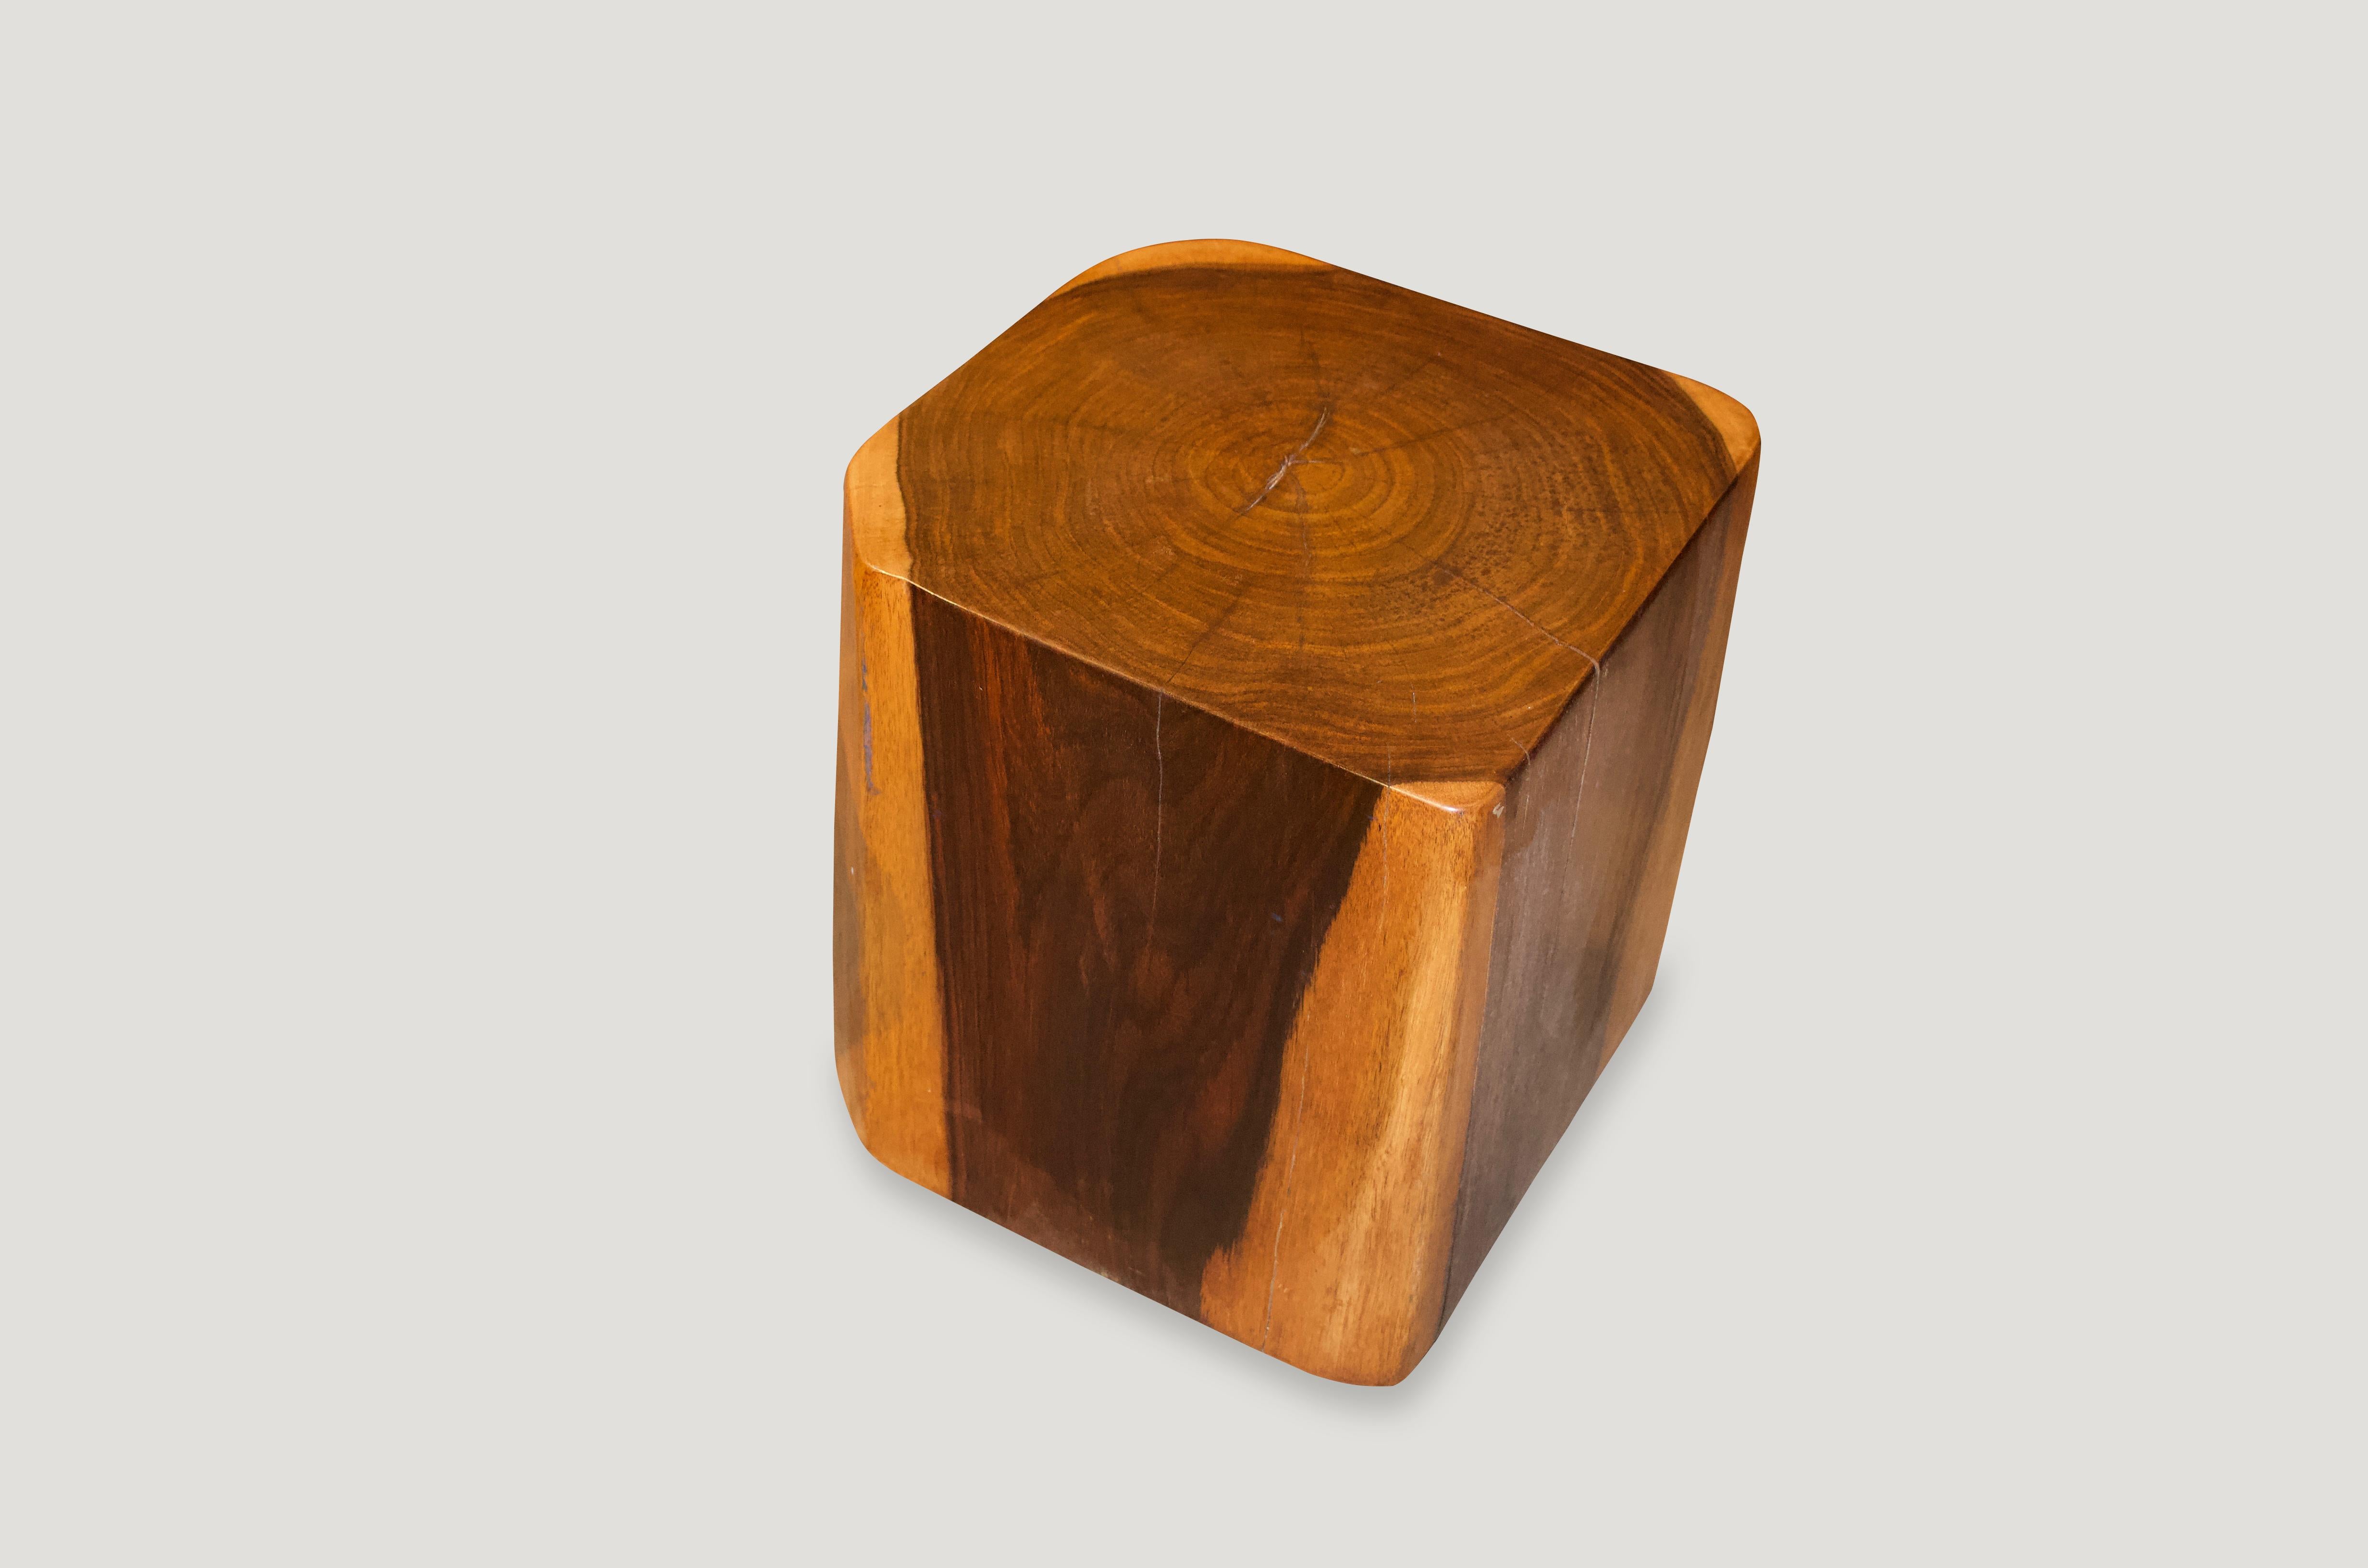 Minimalist sono wood cube side table. We have a collection of three. The price reflects one.

Own an Andrianna Shamaris original. 

Andrianna Shamaris. The Leader In Modern Organic Design. 